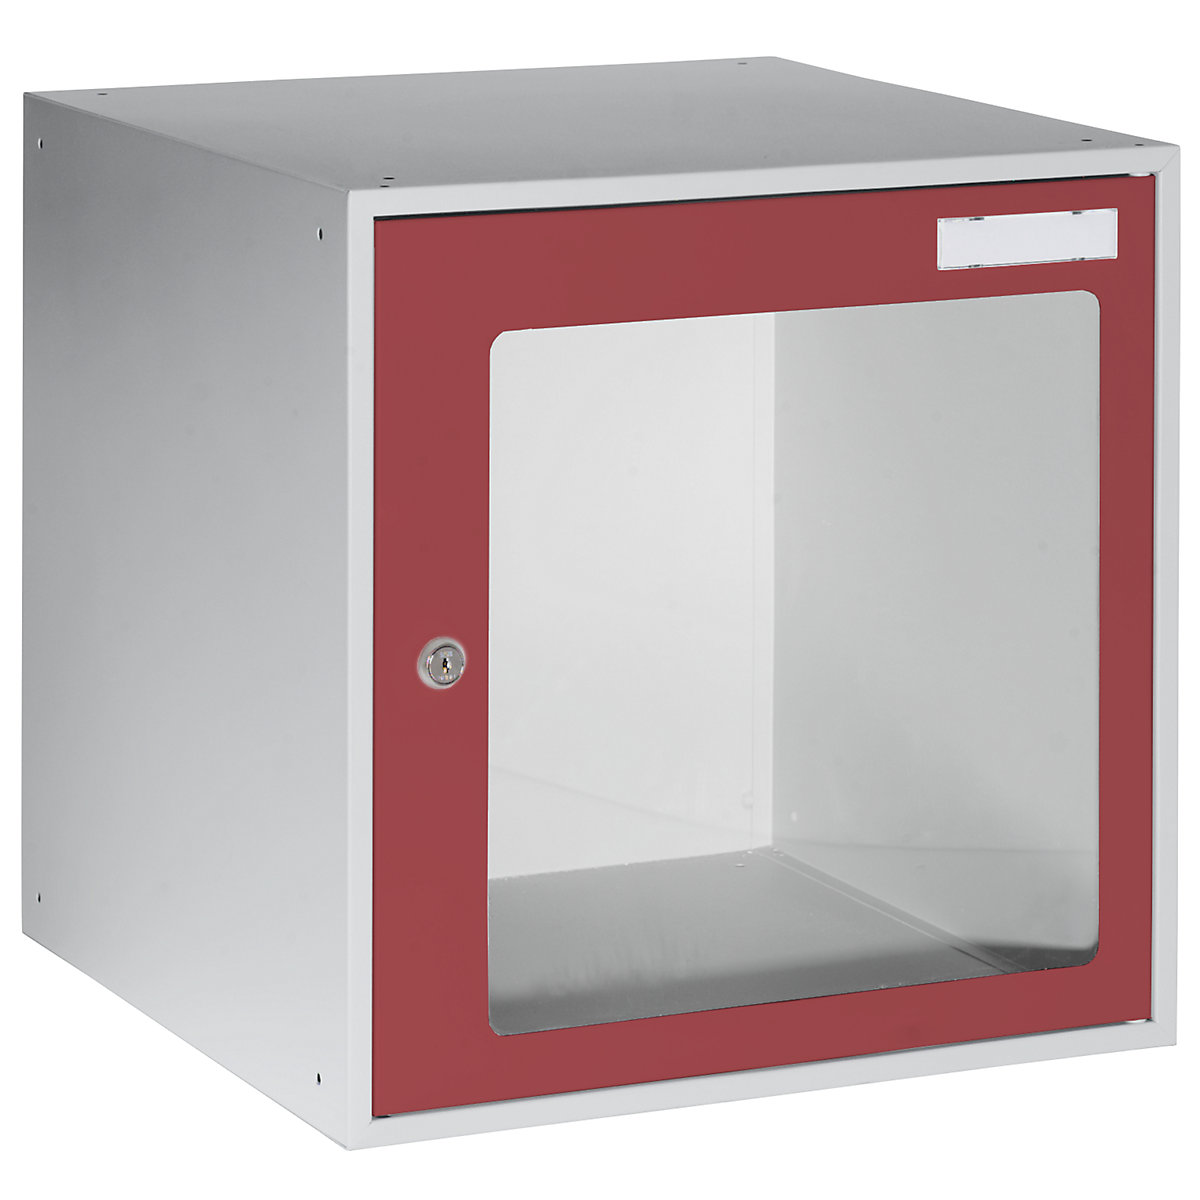 Cube lockers with vision panel – eurokraft basic, HxWxD 450 x 450 x 450 mm, door frame flame red RAL 3000-5